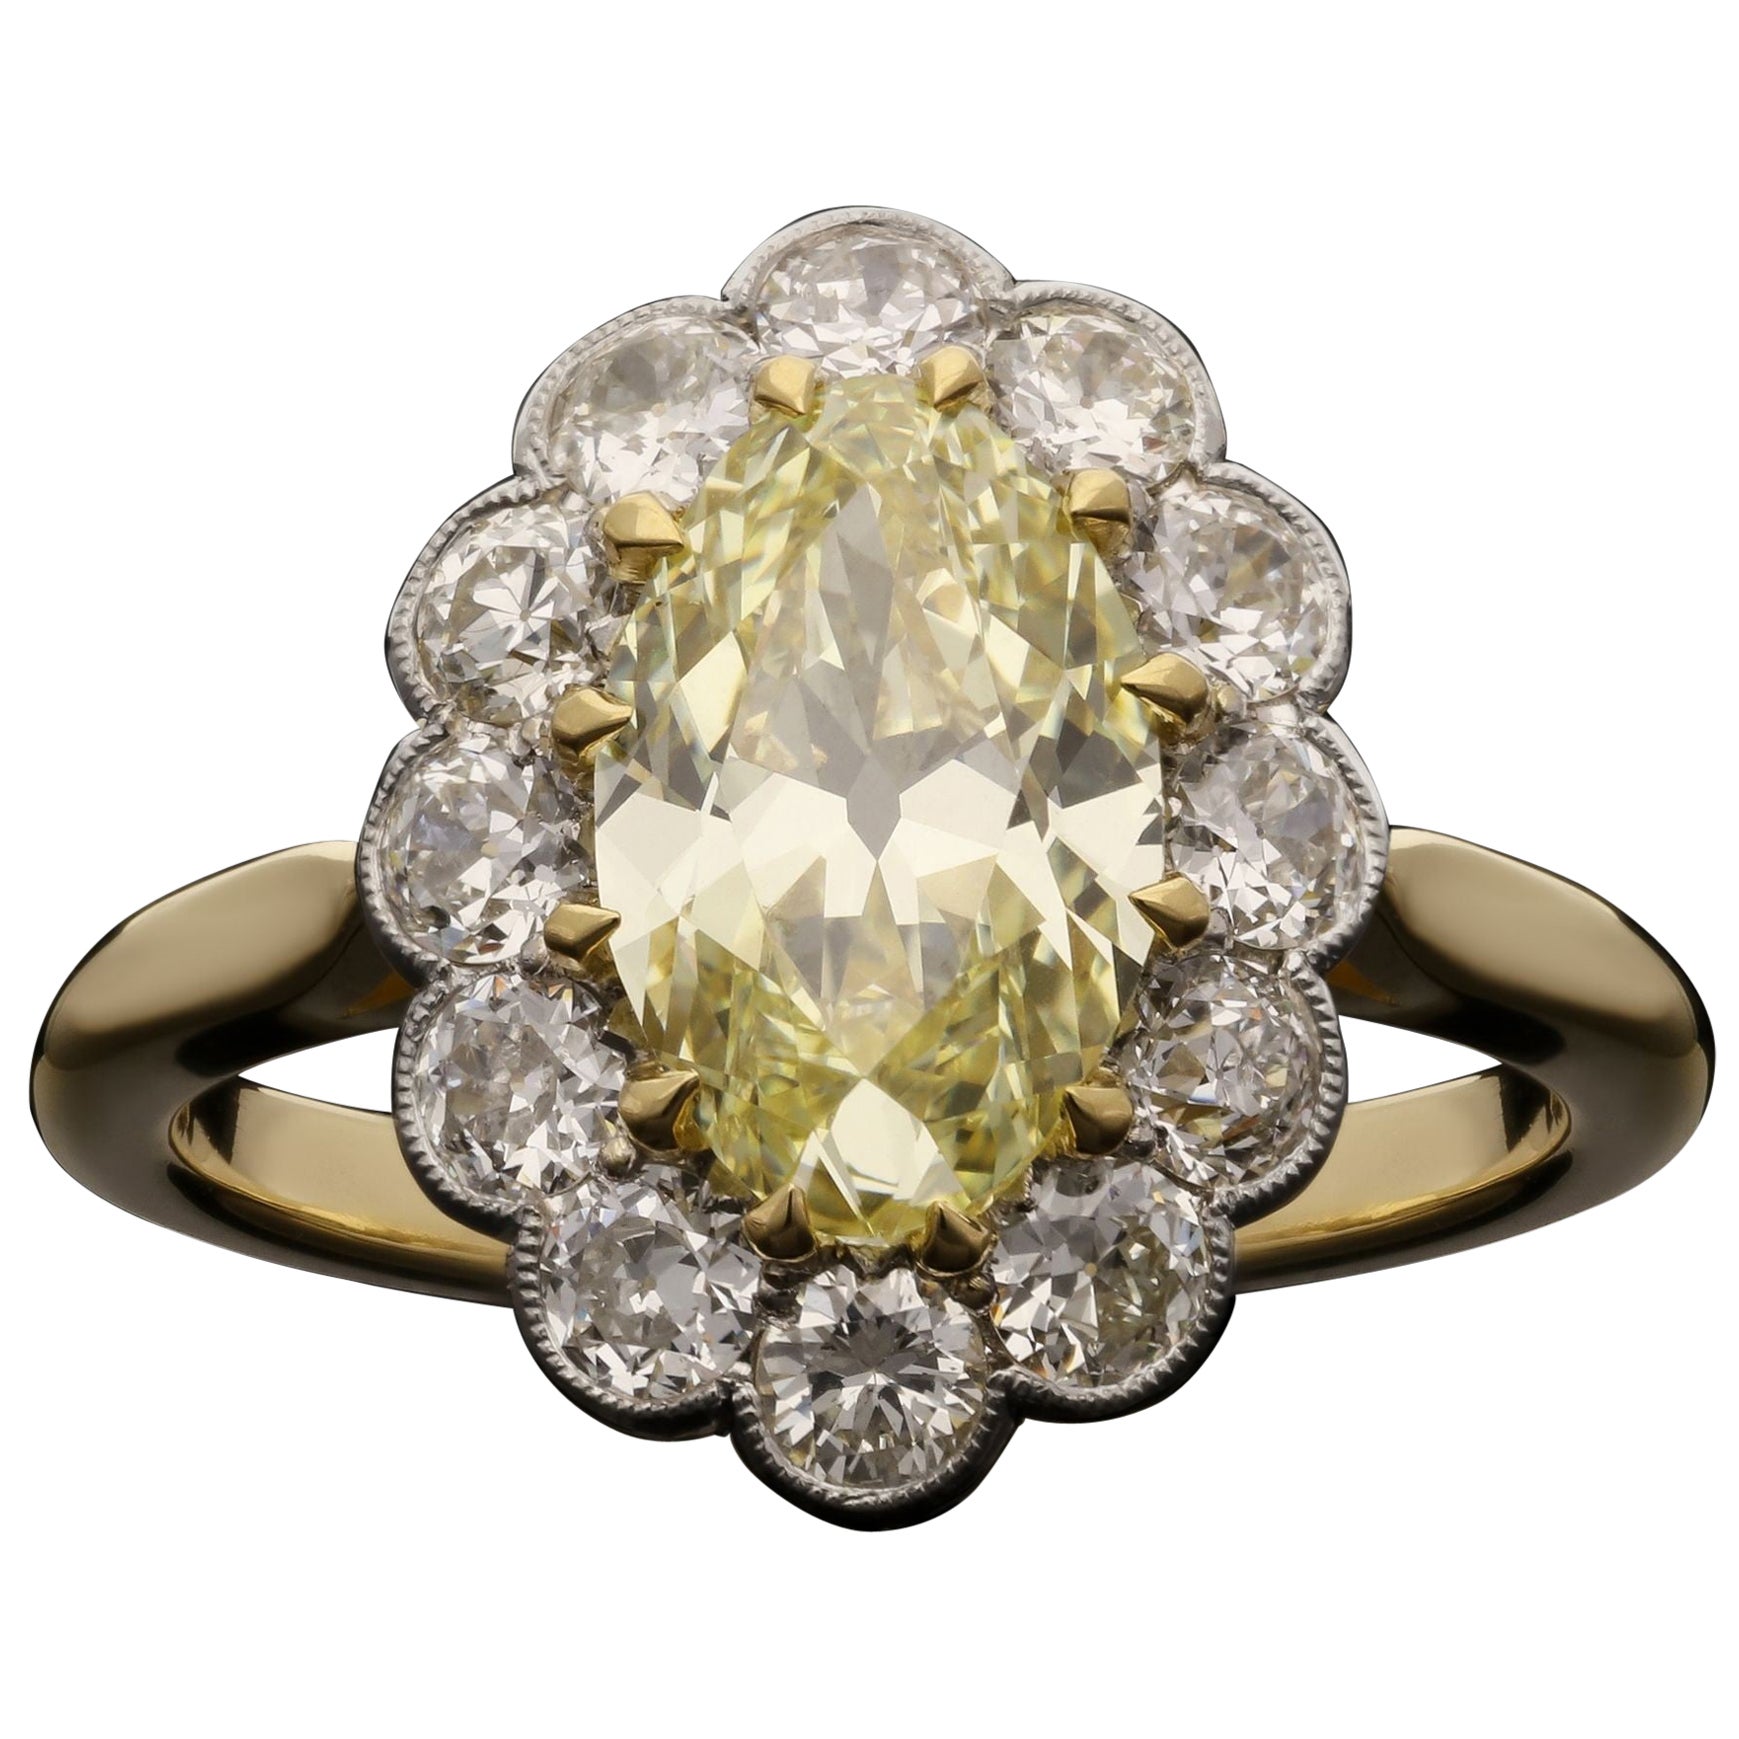 Hancocks 1.83ct Fancy Yellow Moval Diamond Cluster Ring in 18ct Yellow Gold